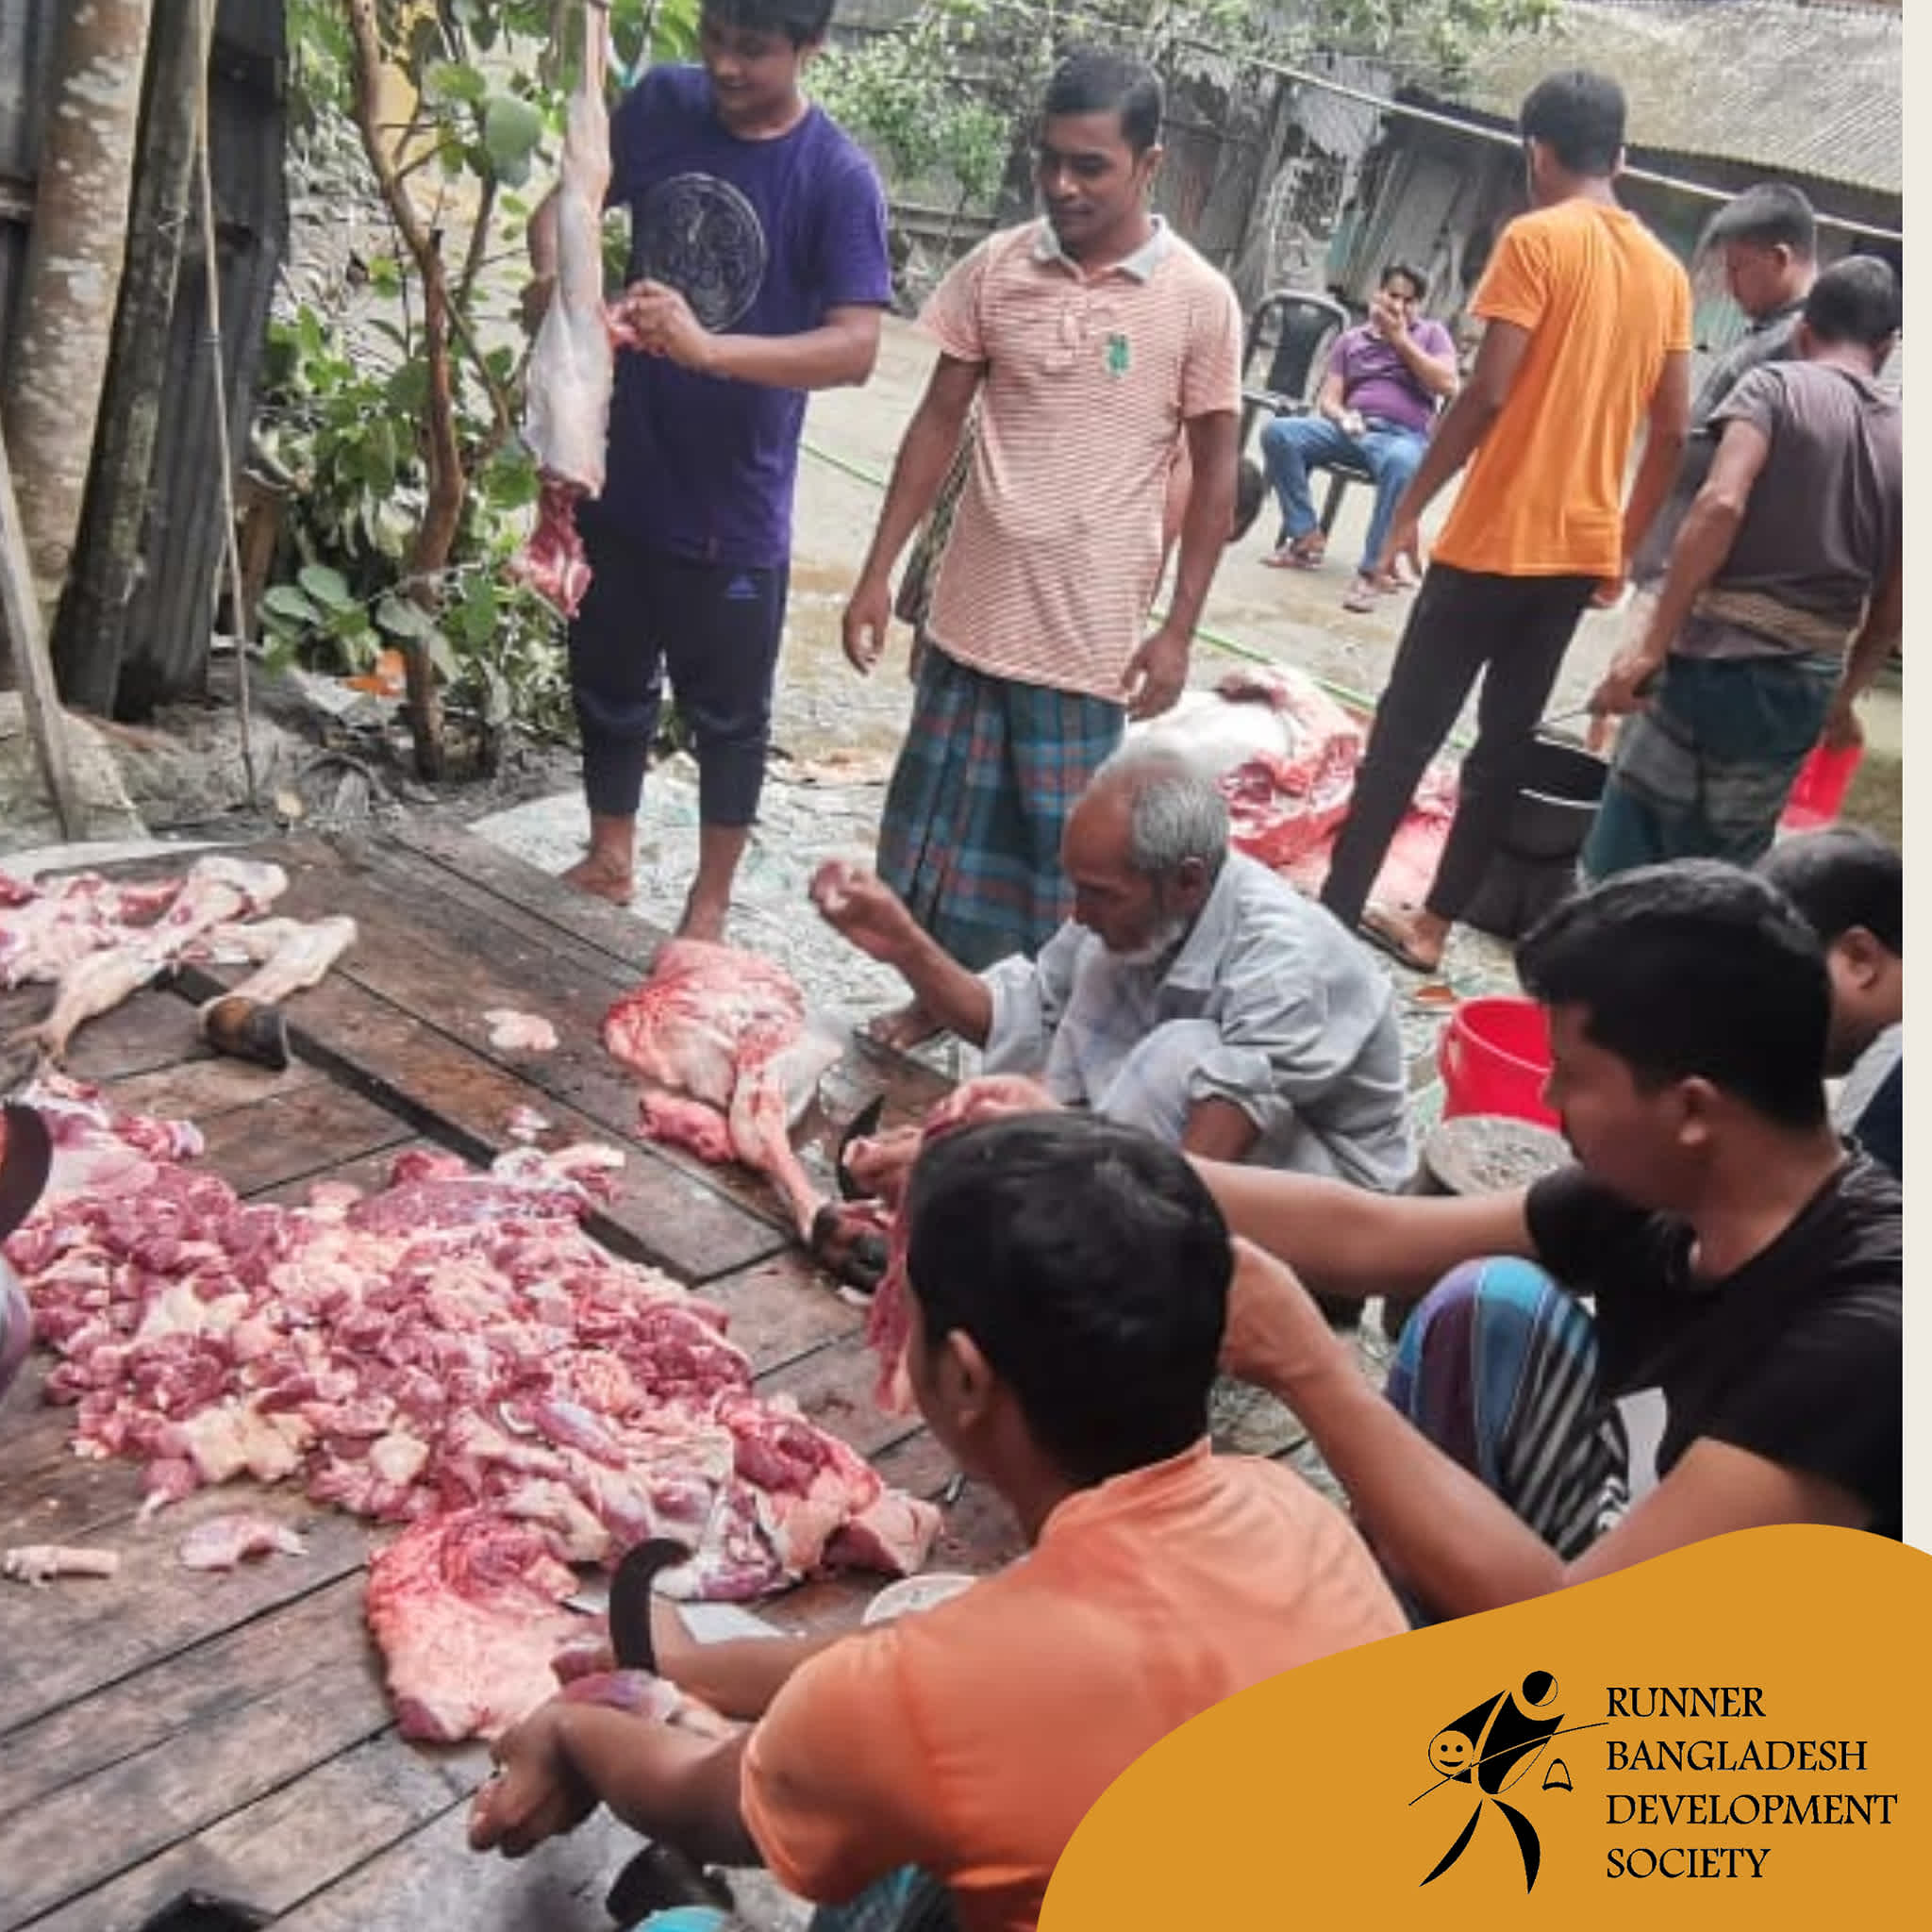 Butchers at work cutting down meat to be distributed in Sonagazi, Feni